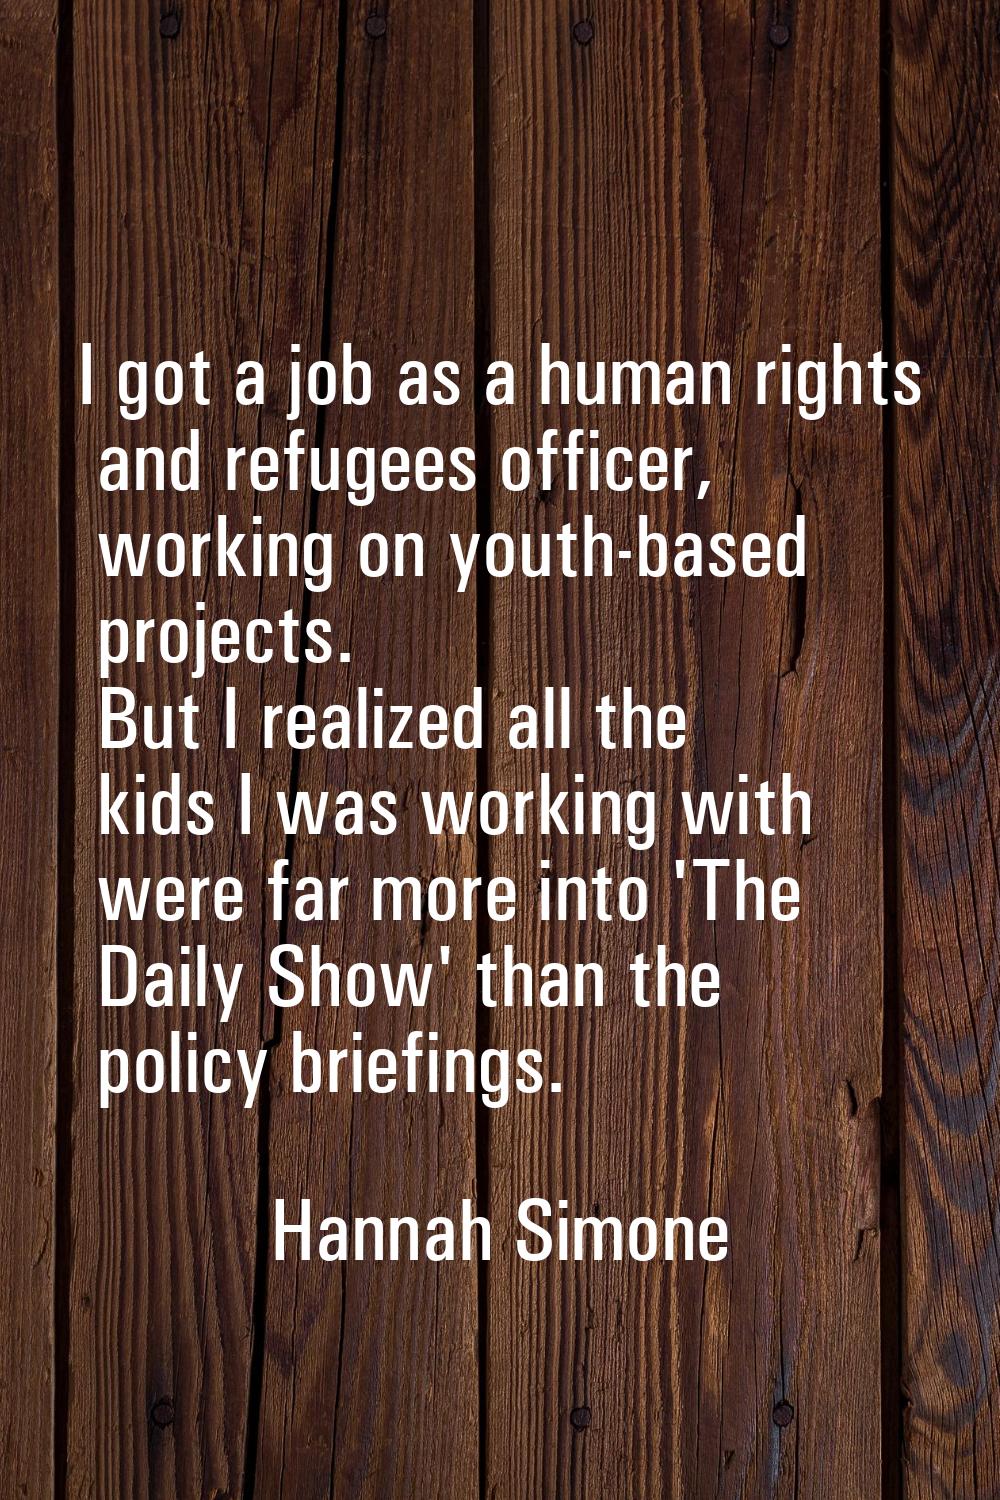 I got a job as a human rights and refugees officer, working on youth-based projects. But I realized